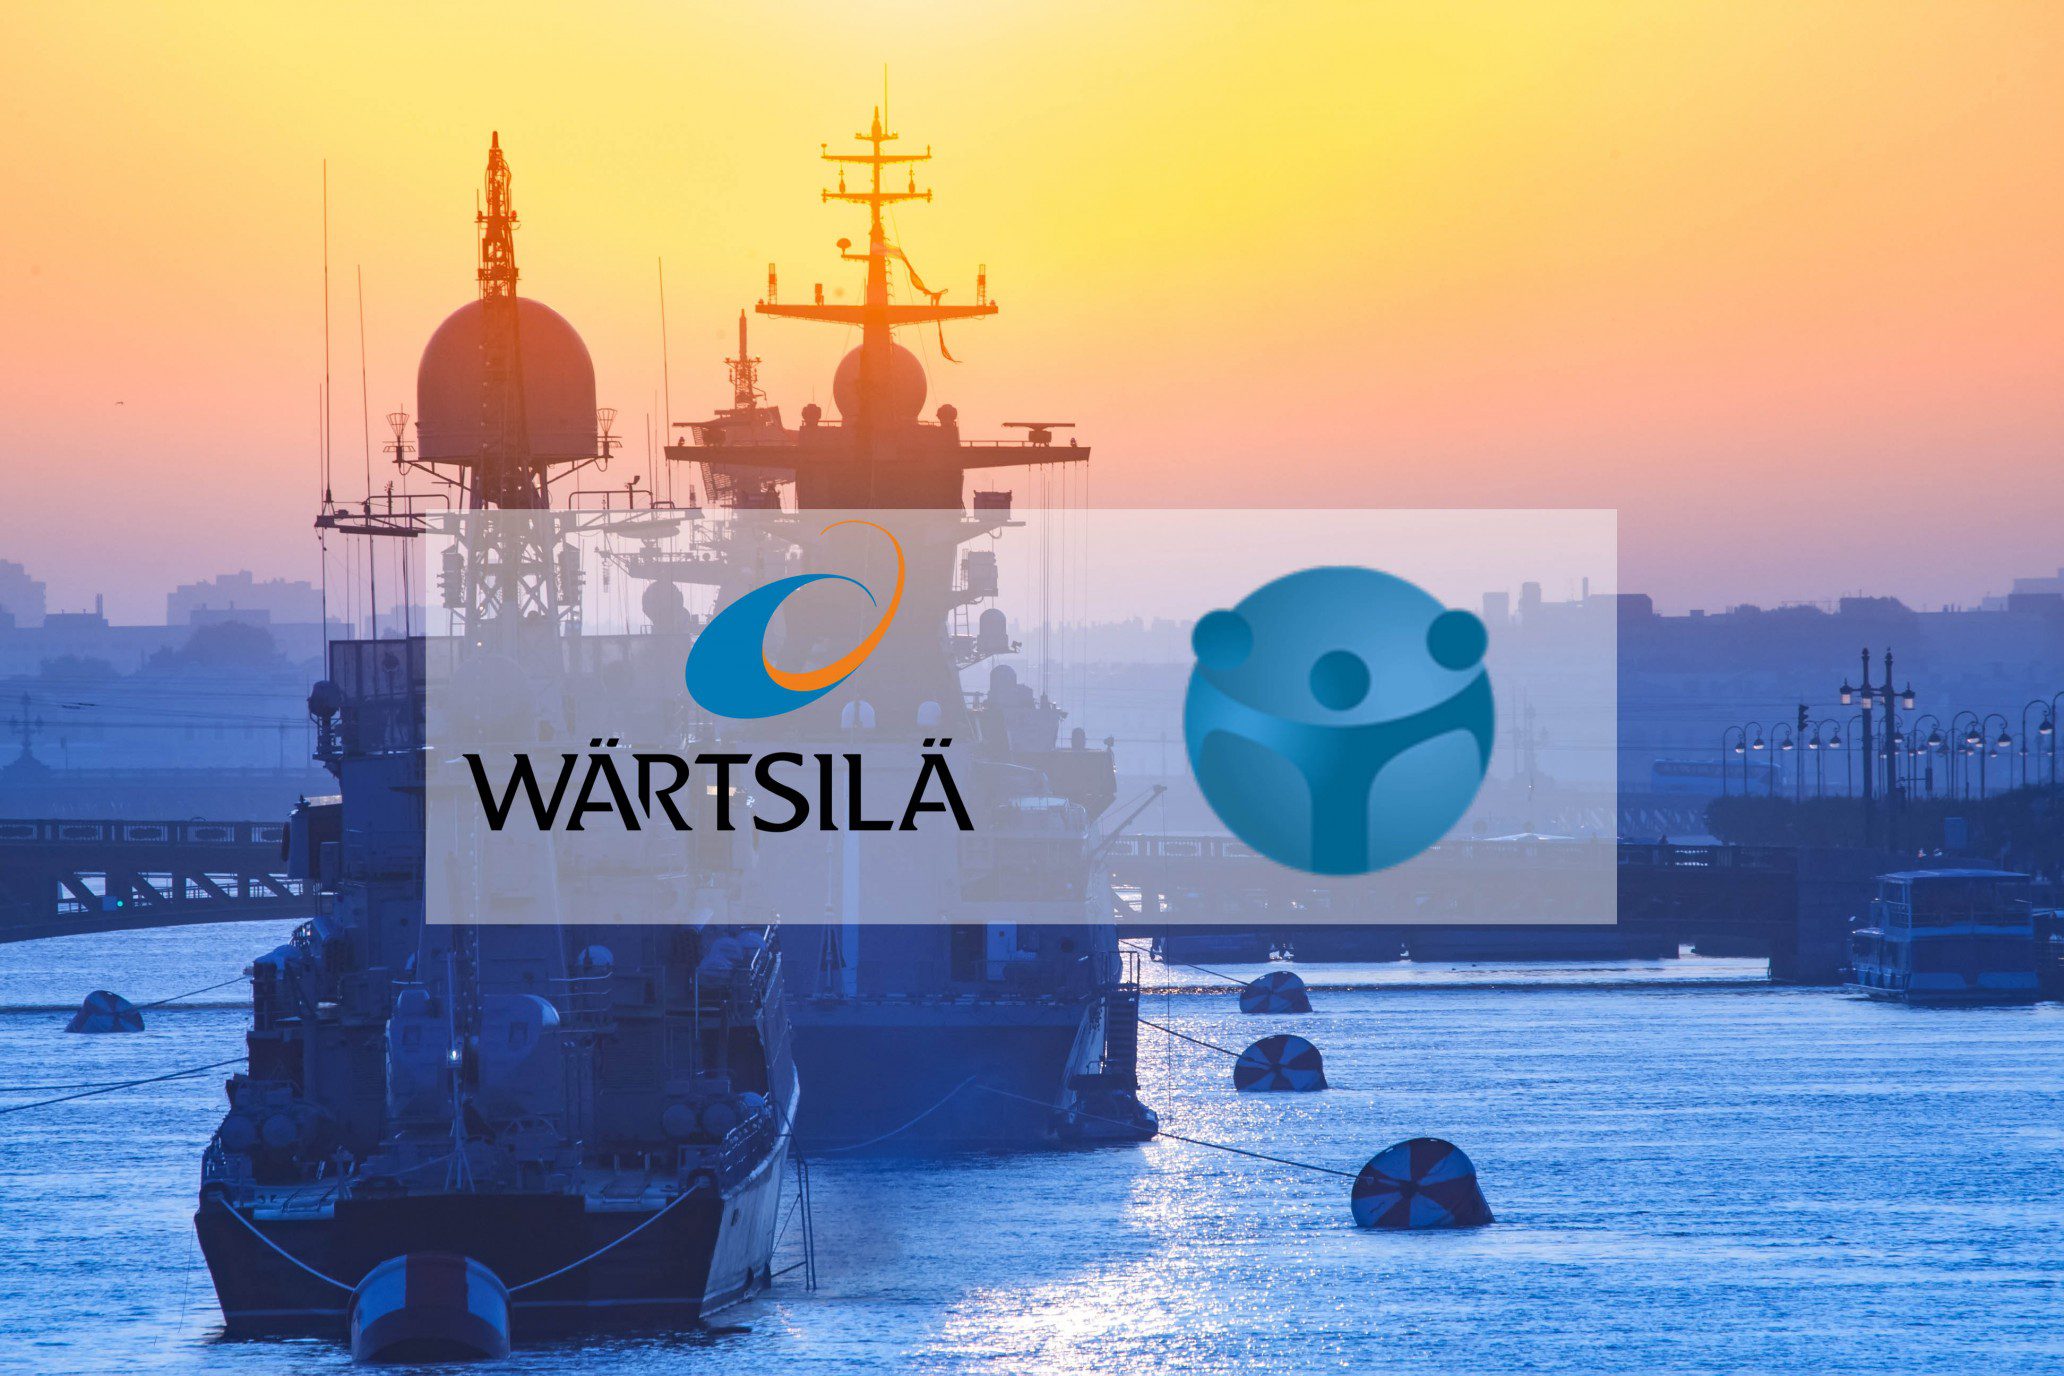 Marine People and Wärtsilä join forces to provide graduate and entry-level opportunities